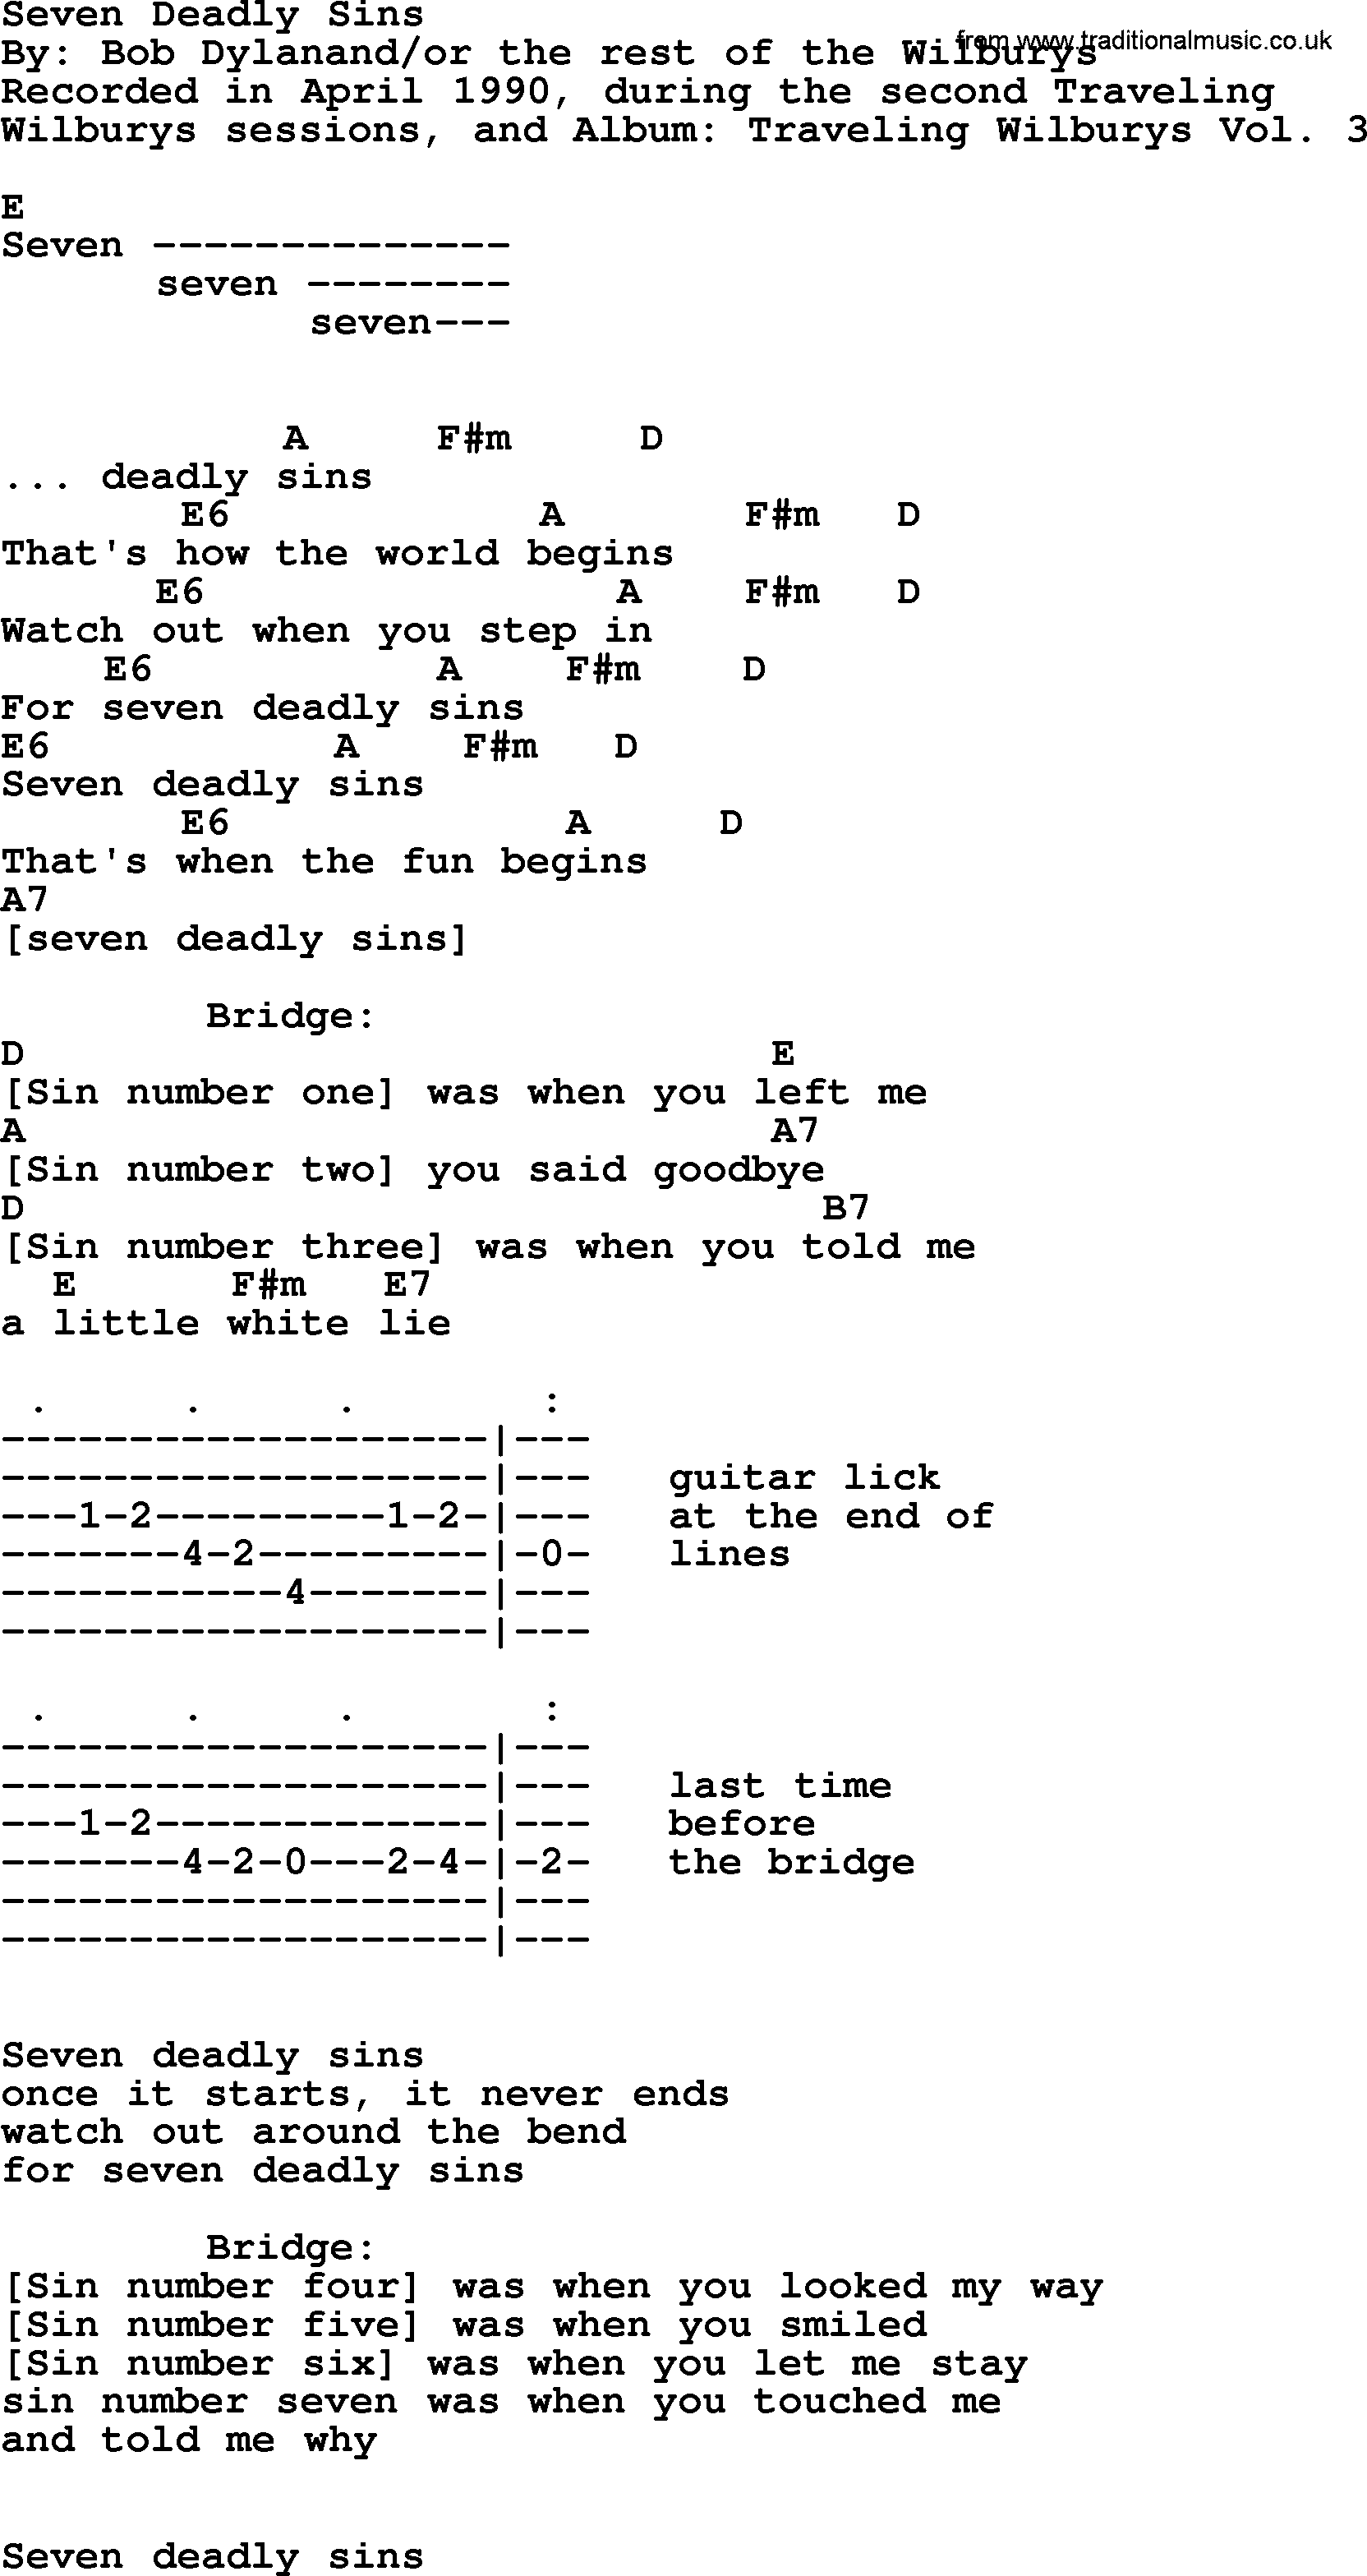 Bob Dylan song, lyrics with chords - Seven Deadly Sins